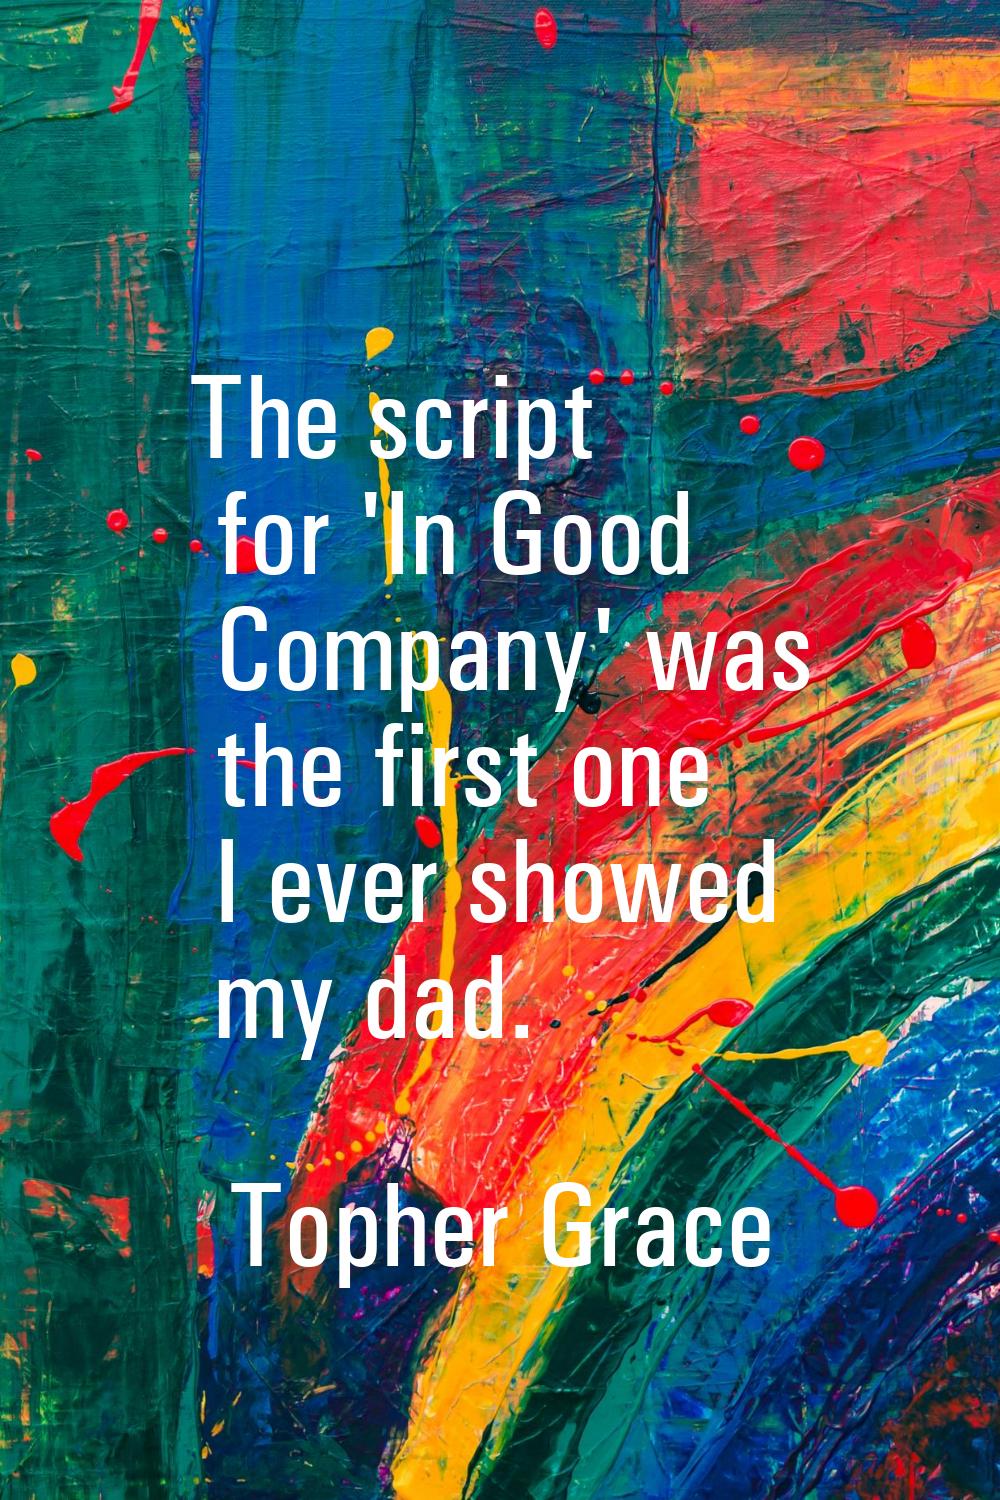 The script for 'In Good Company' was the first one I ever showed my dad.